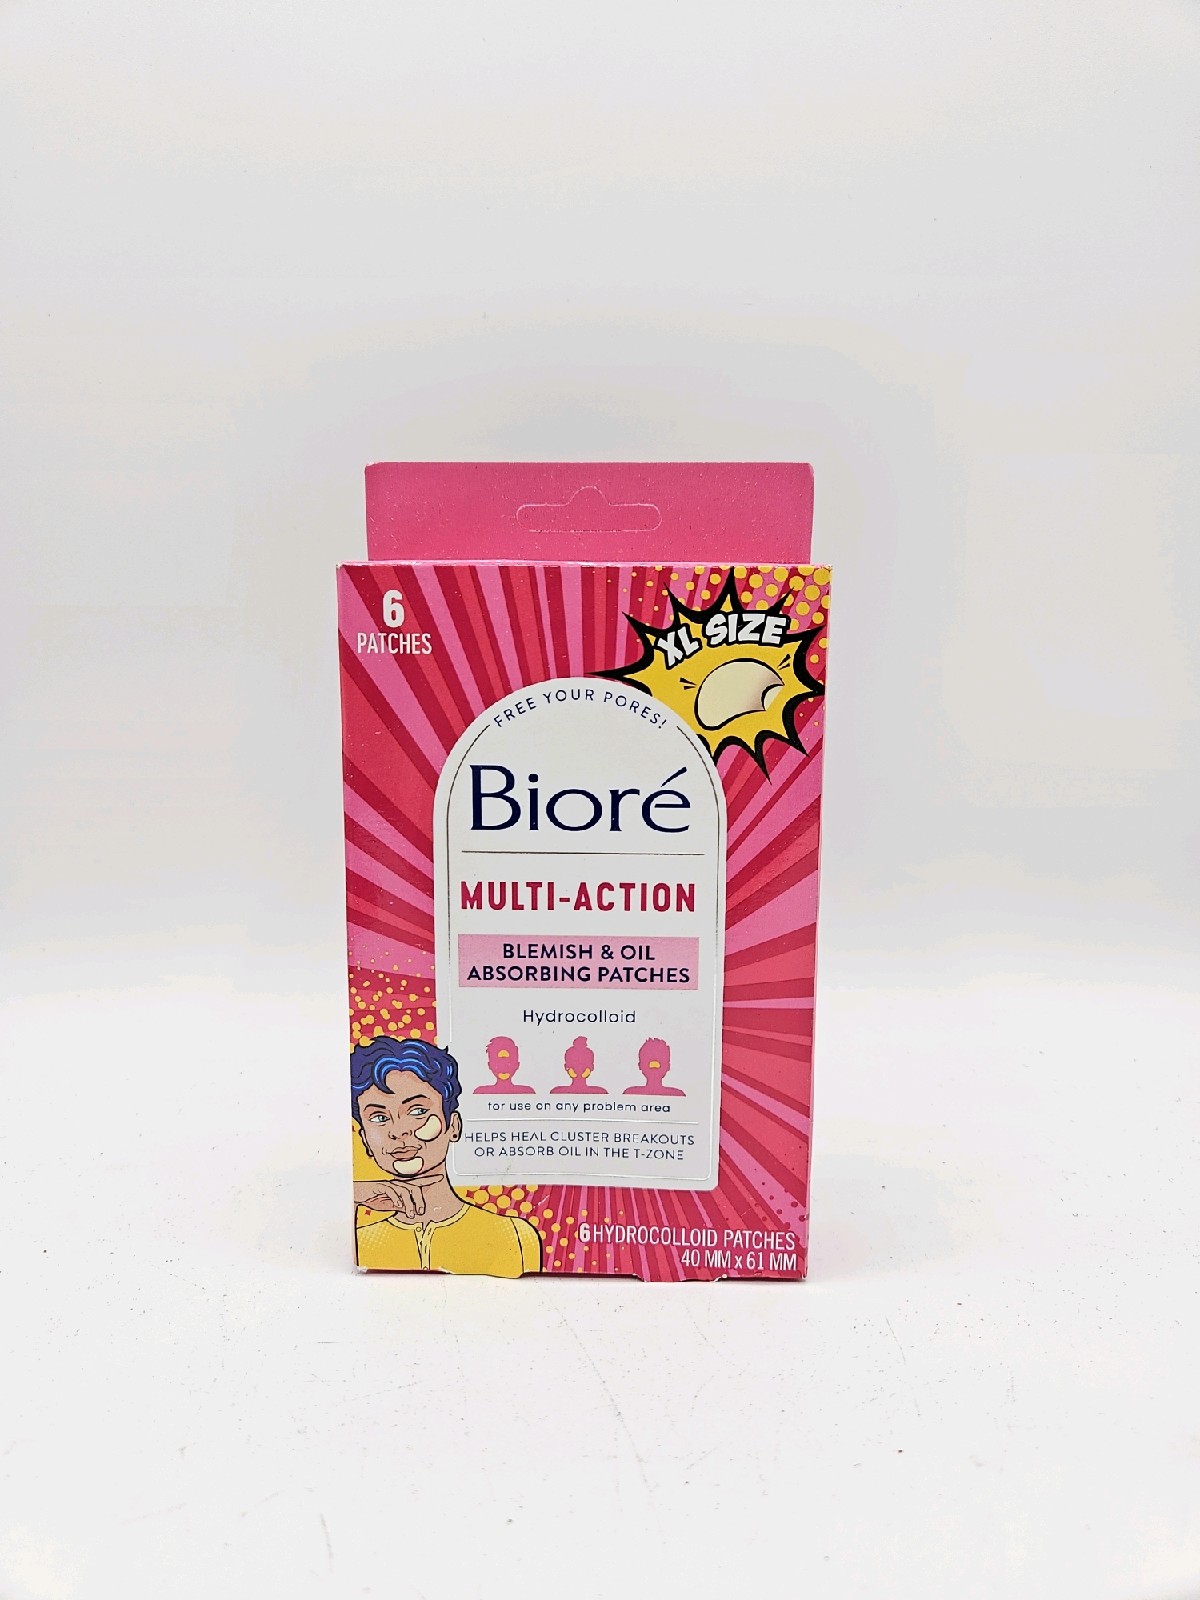 Biore Multi Action Blemish & Oil Absorbing Patches 6 Count